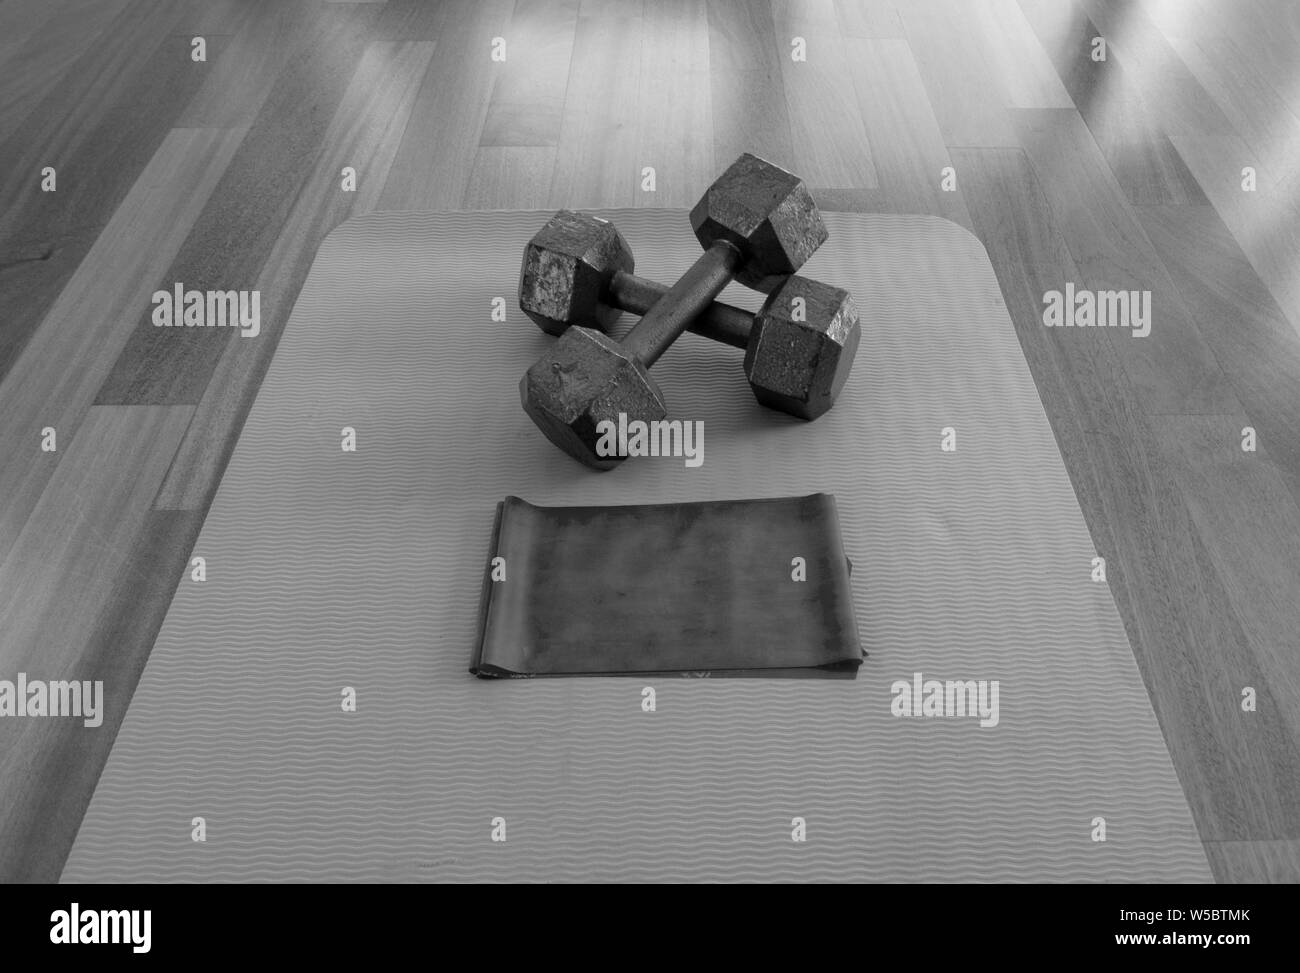 Black and white version of Crossed Dumbbells and Exercise band on a Yoga Mat for a Home workout Stock Photo